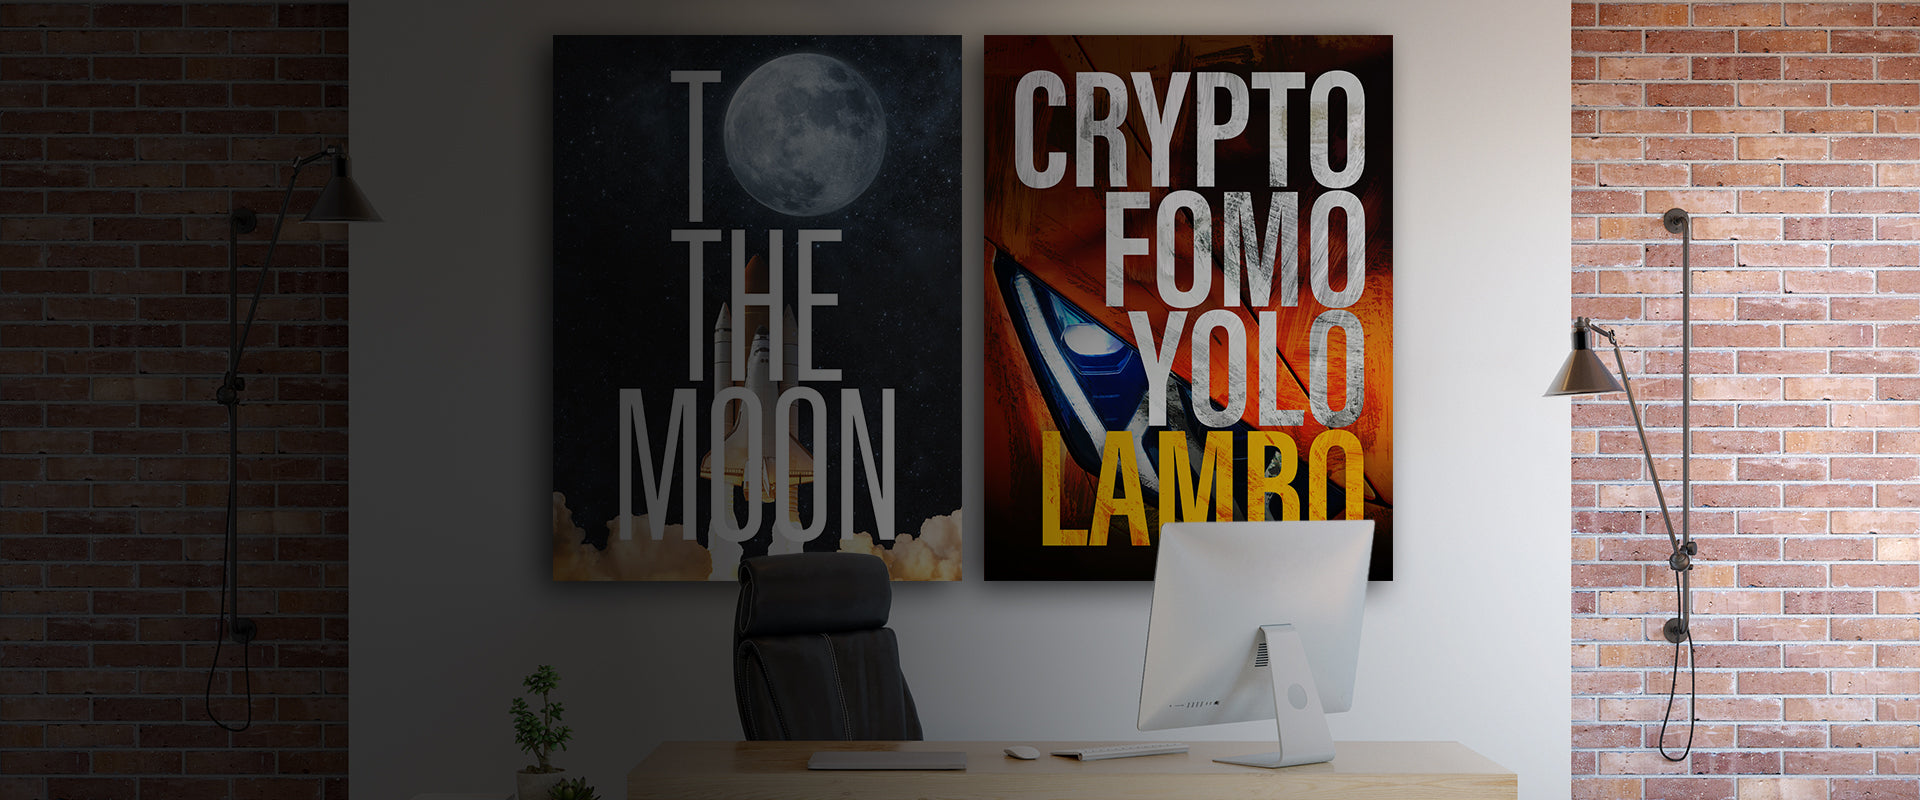 Home office with two large motivational canvas wrap wall art pieces hanging above desk. To The Moon and Crypto FOMO Yolo Lambo canvas wrap art pieces are hanging on white wall next to lamp.